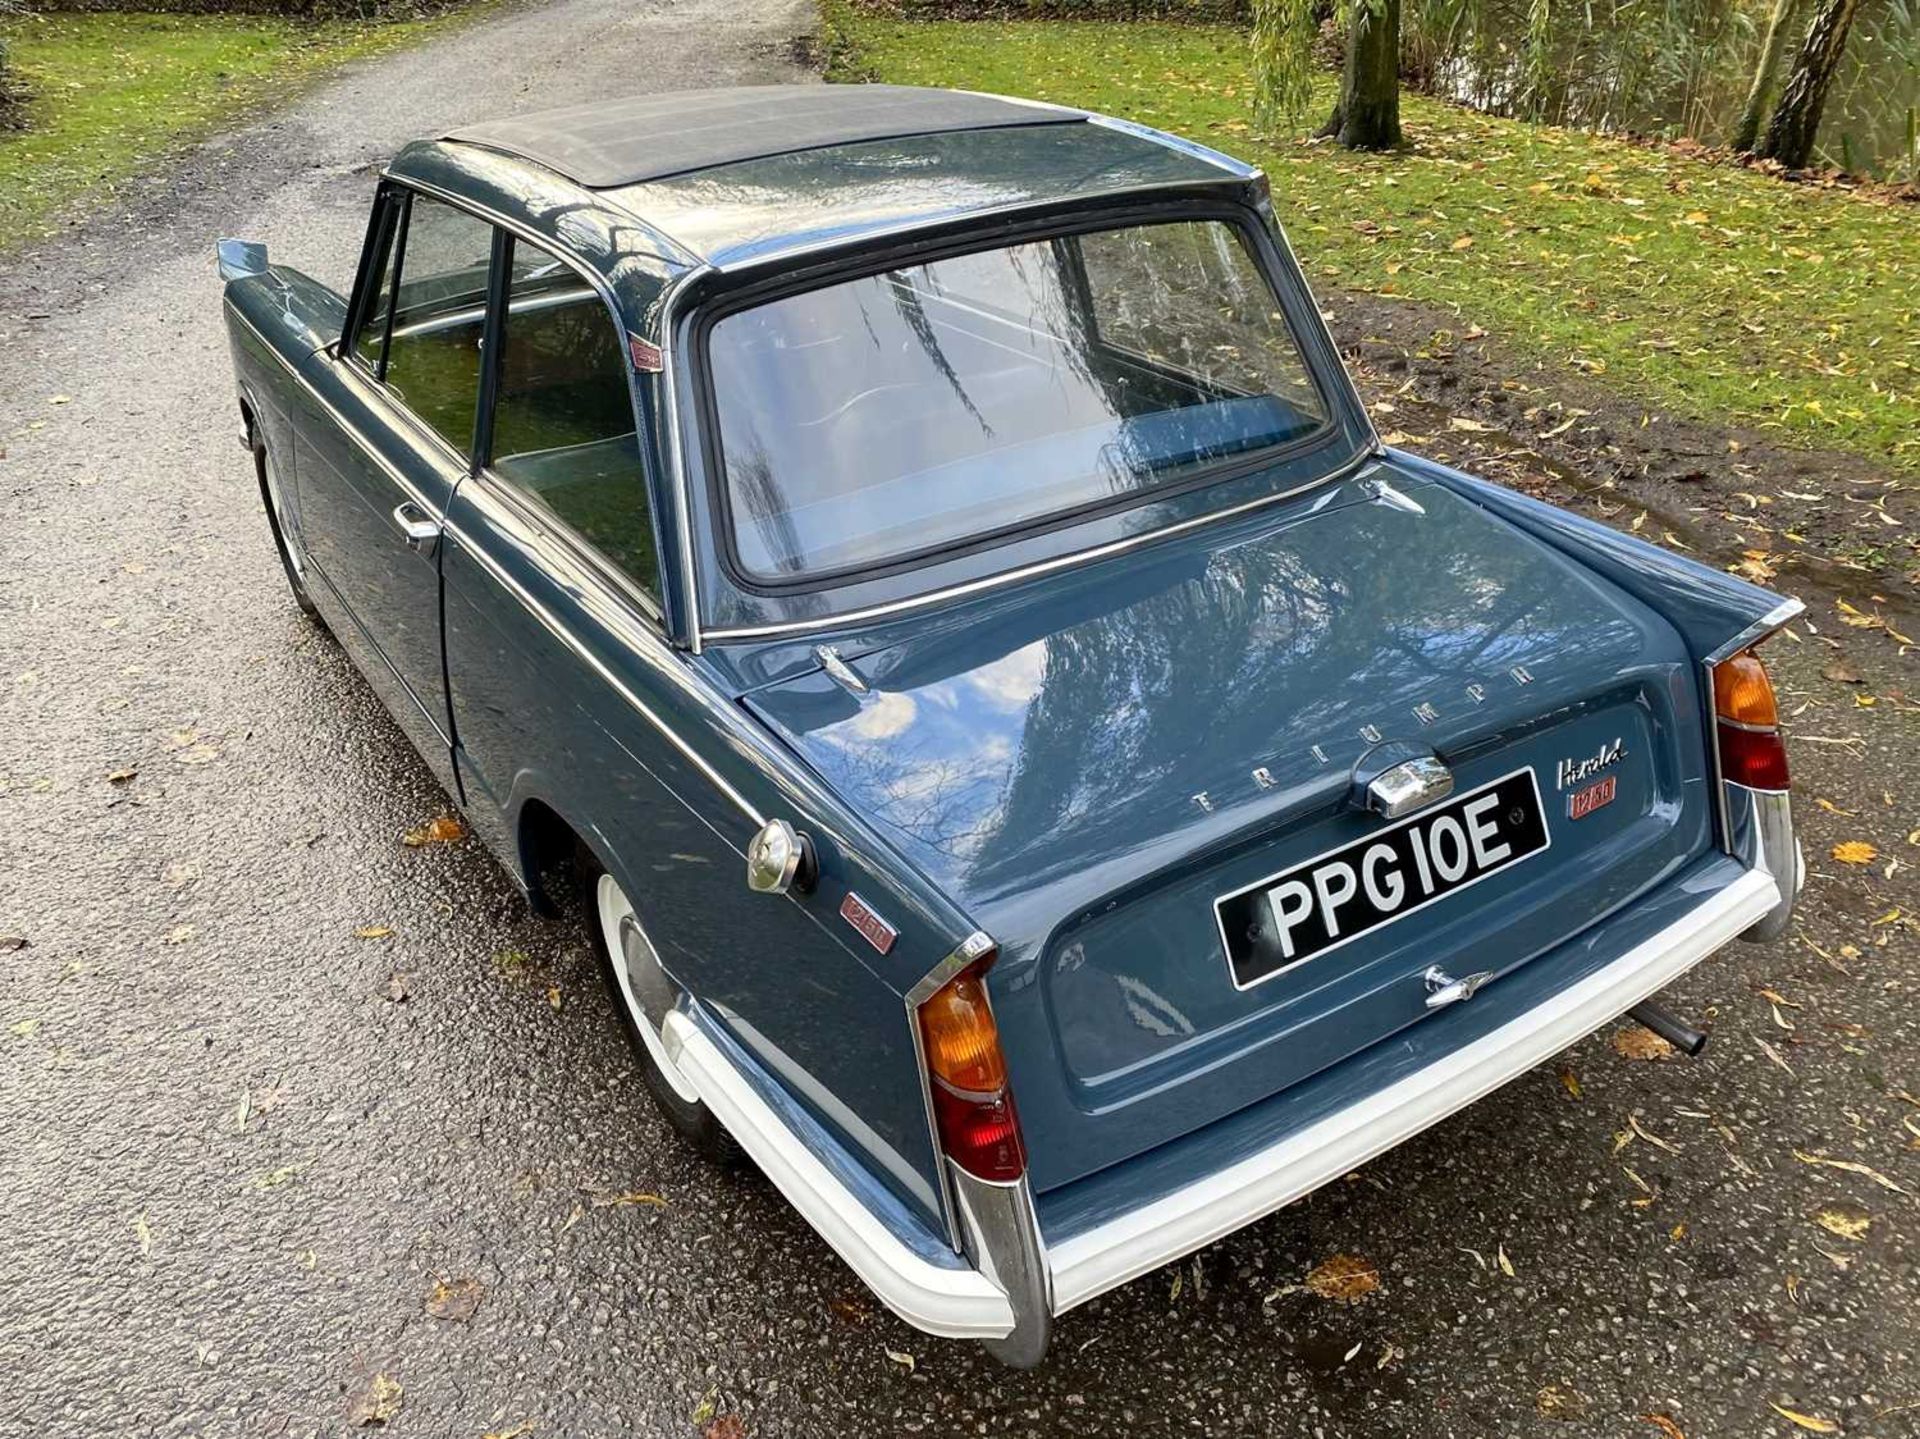 1967 Triumph Herald 12/50 *** NO RESERVE *** Subject to an extensive restoration - Image 25 of 97